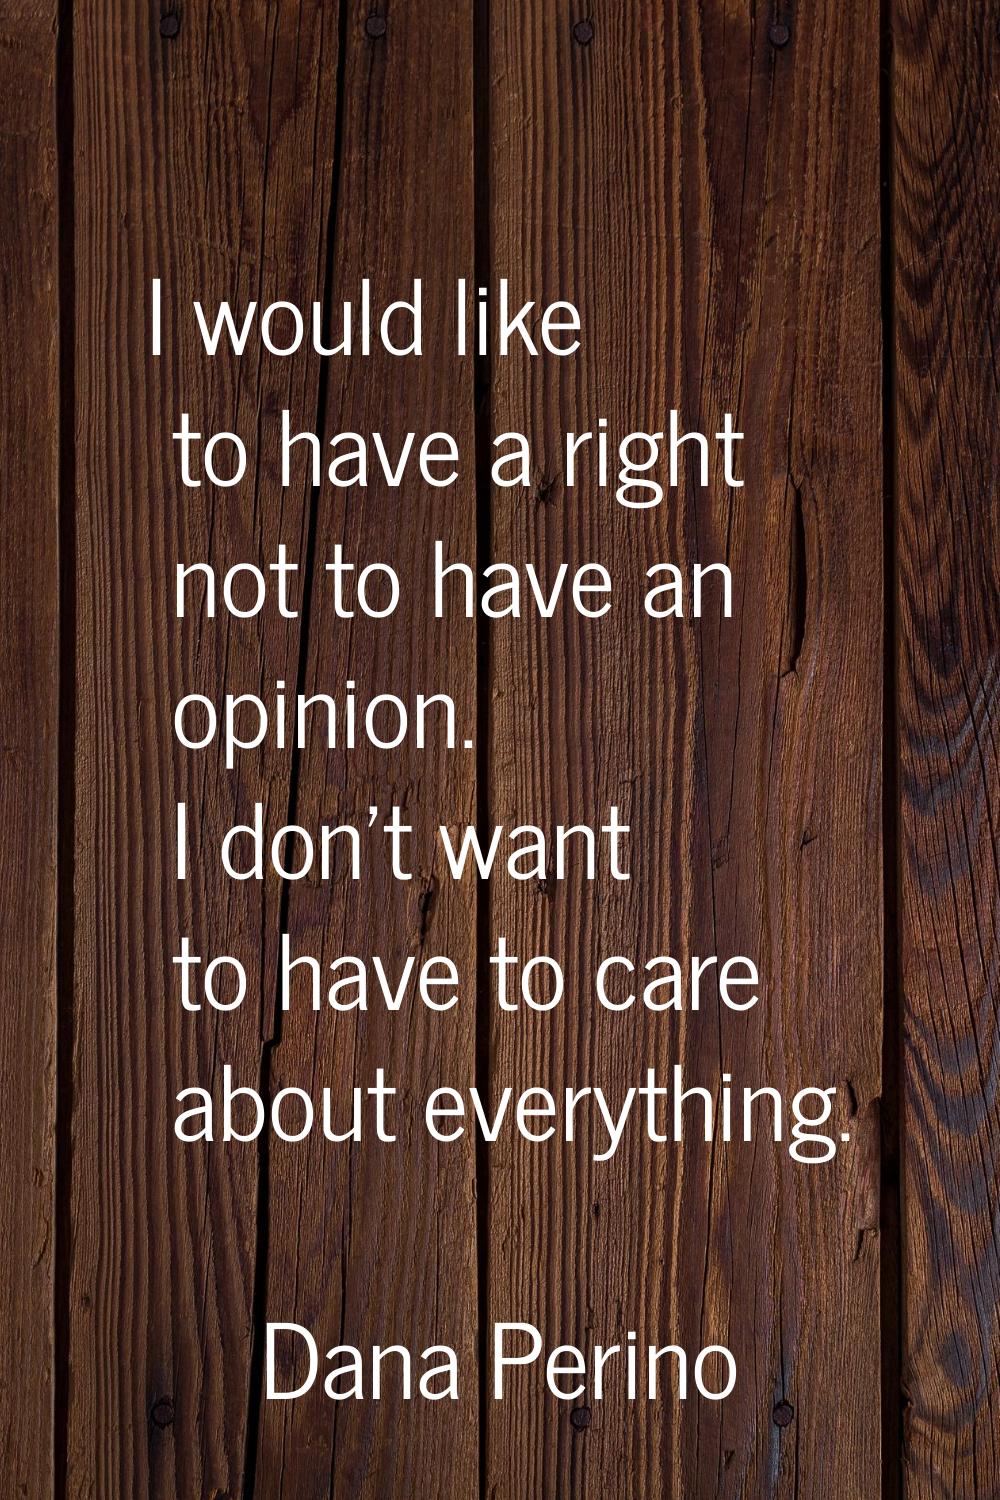 I would like to have a right not to have an opinion. I don't want to have to care about everything.